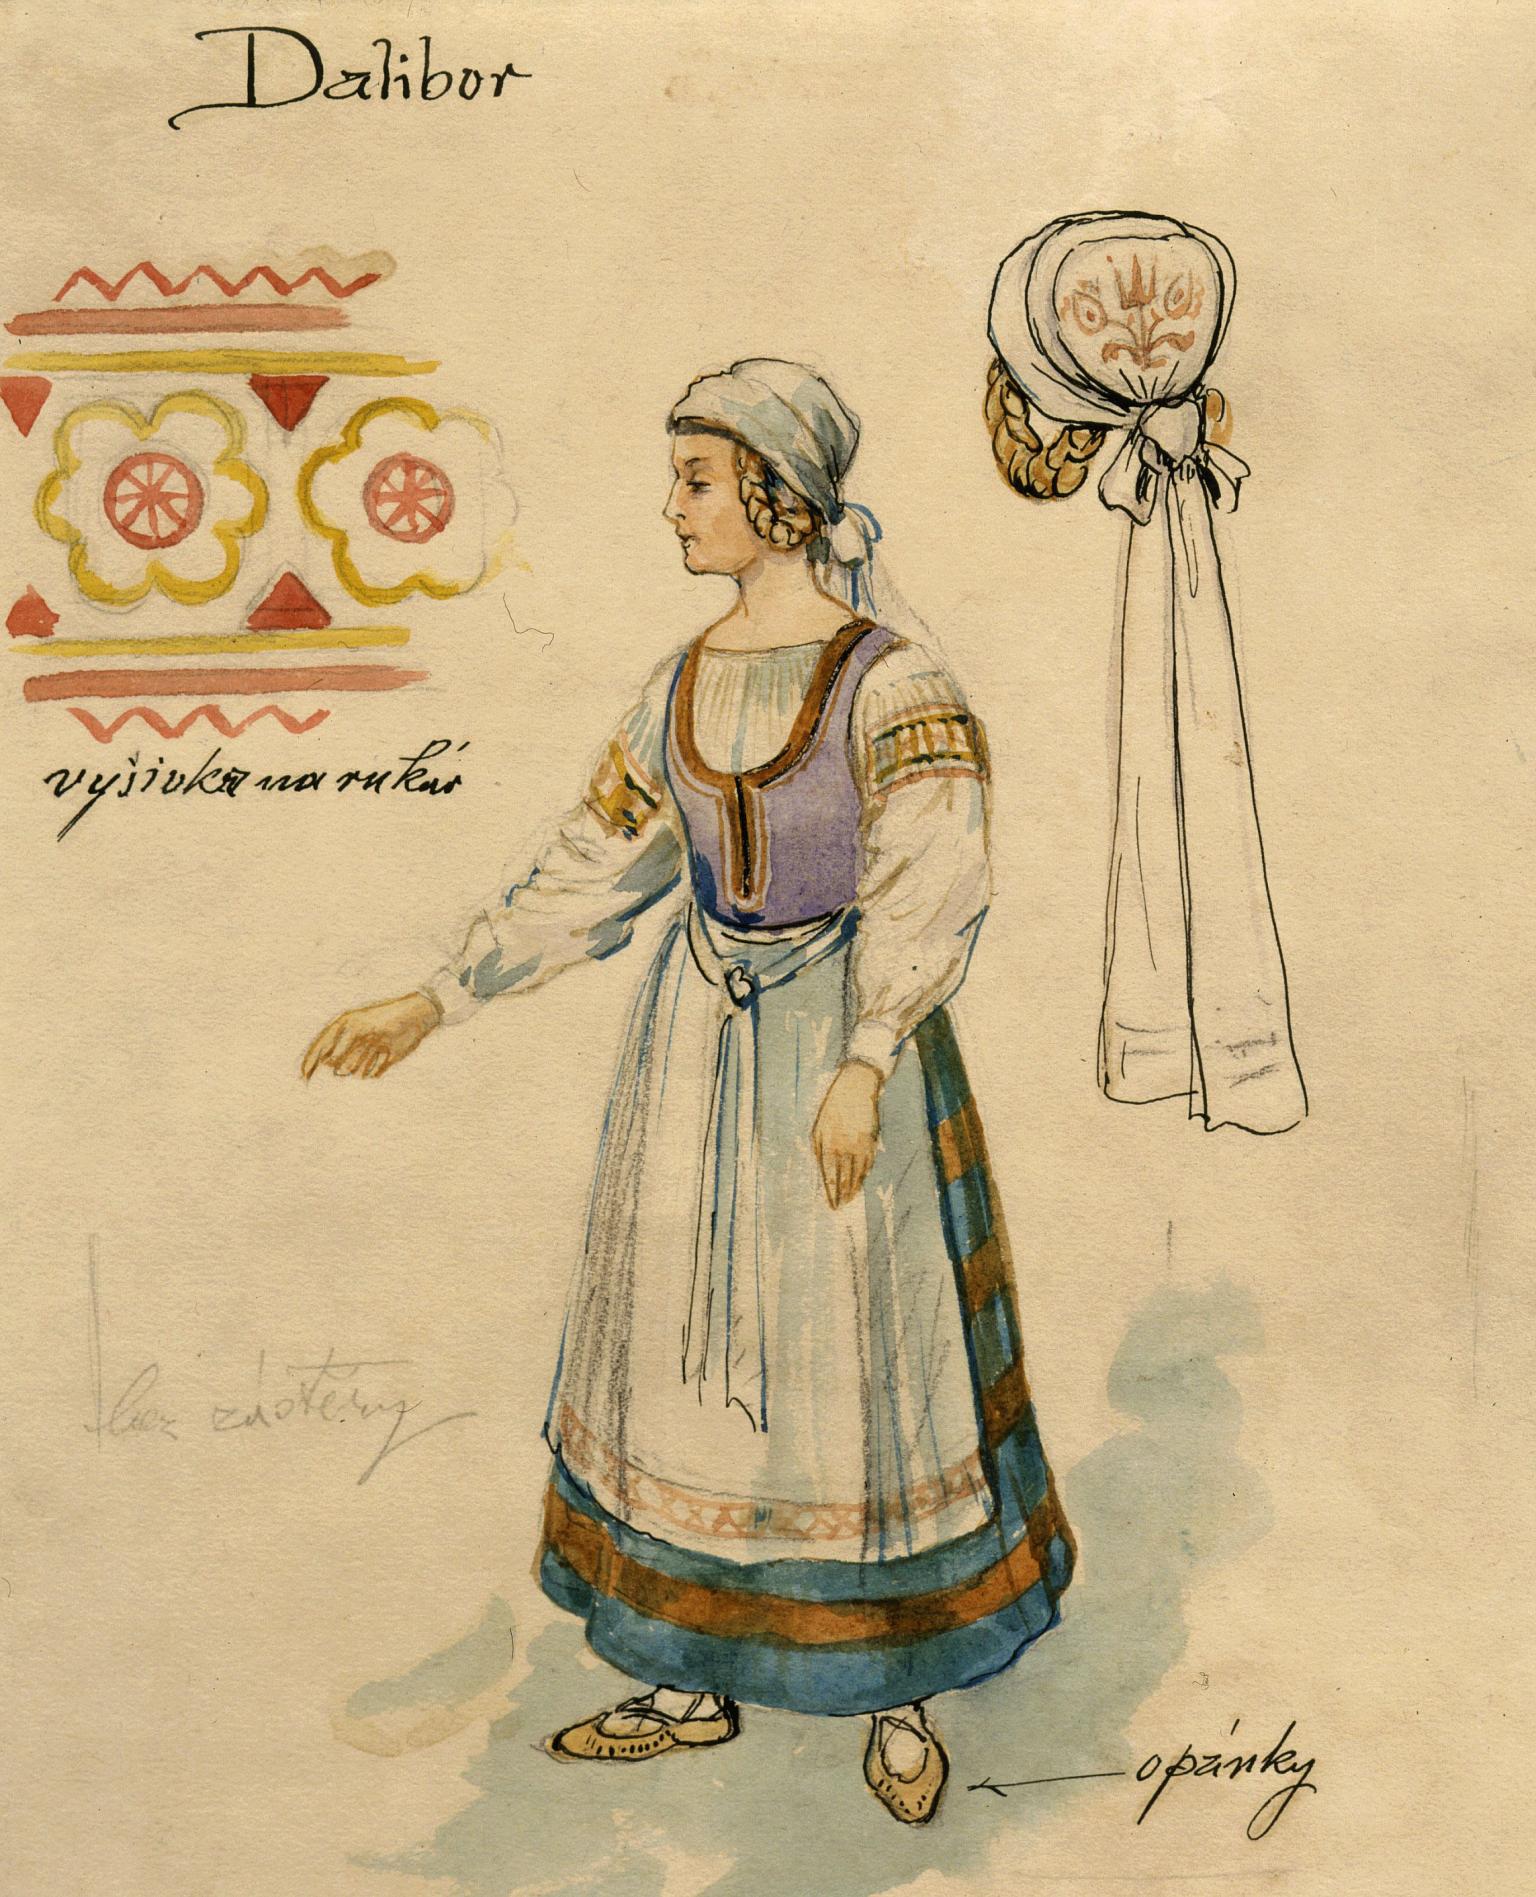 Drawing of floral image, young girl in costume, and bonnet.